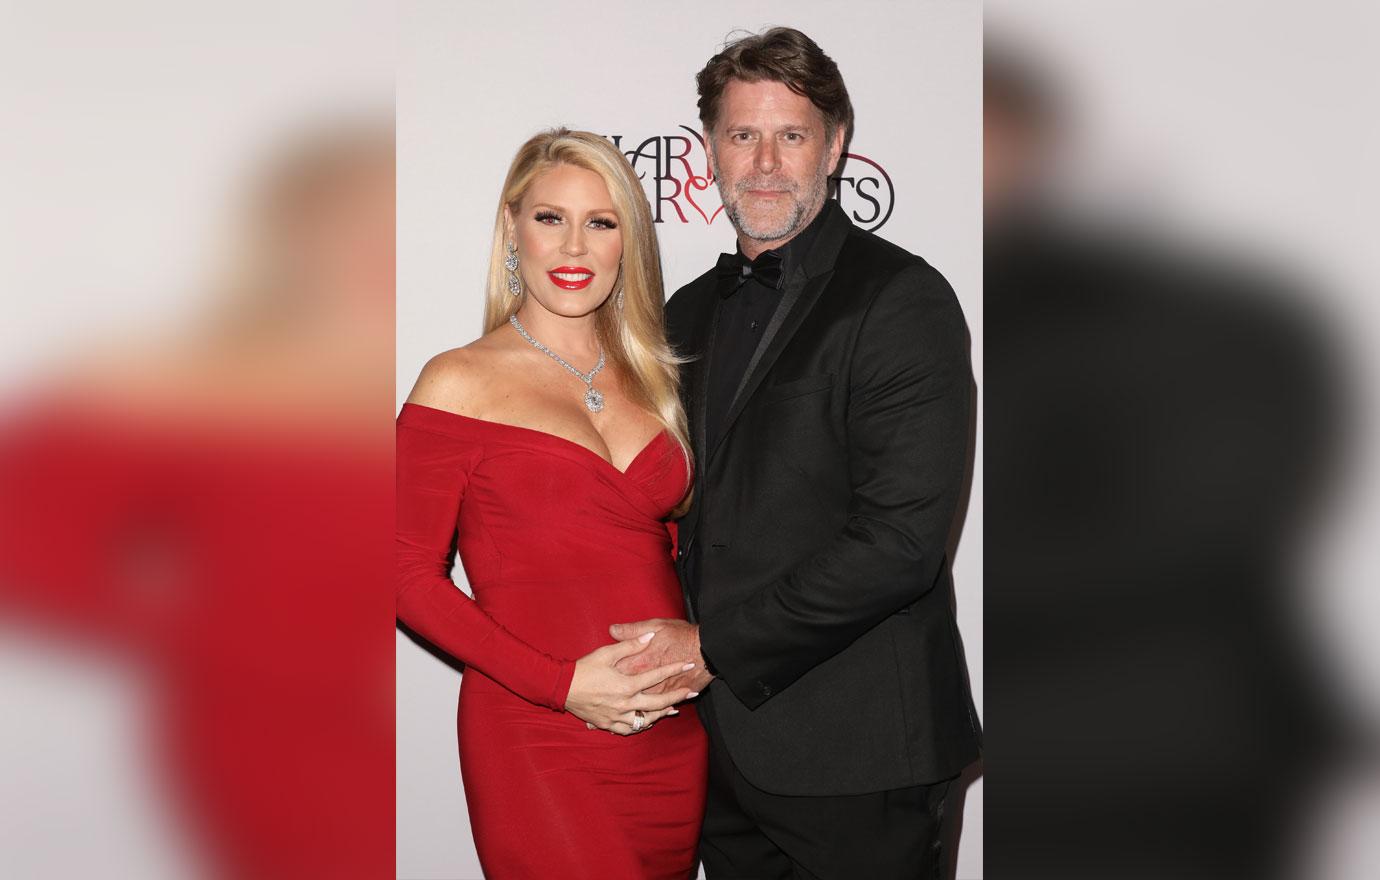 RHOC Very Pregnant Gretchen Rossi Shares Near-Naked Snap